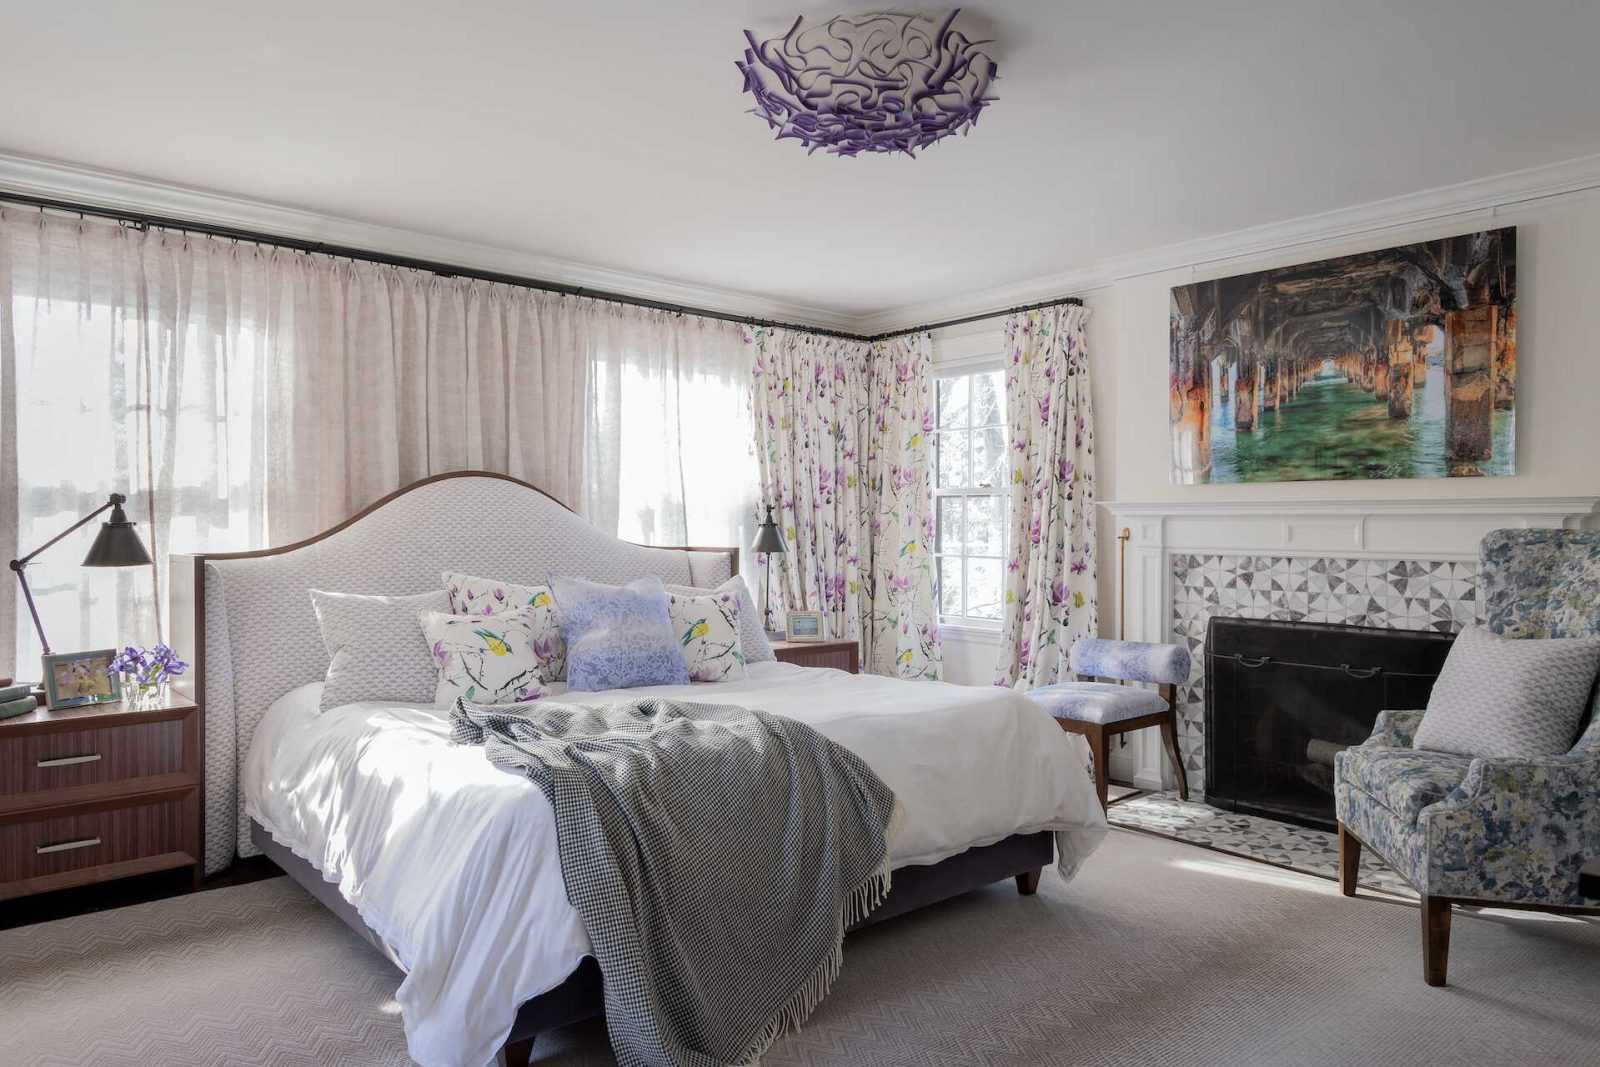 Master bedroom has playful purple hues, floral curtains, rosewood headboard and bedside tables, and a lilac marble fireplace.